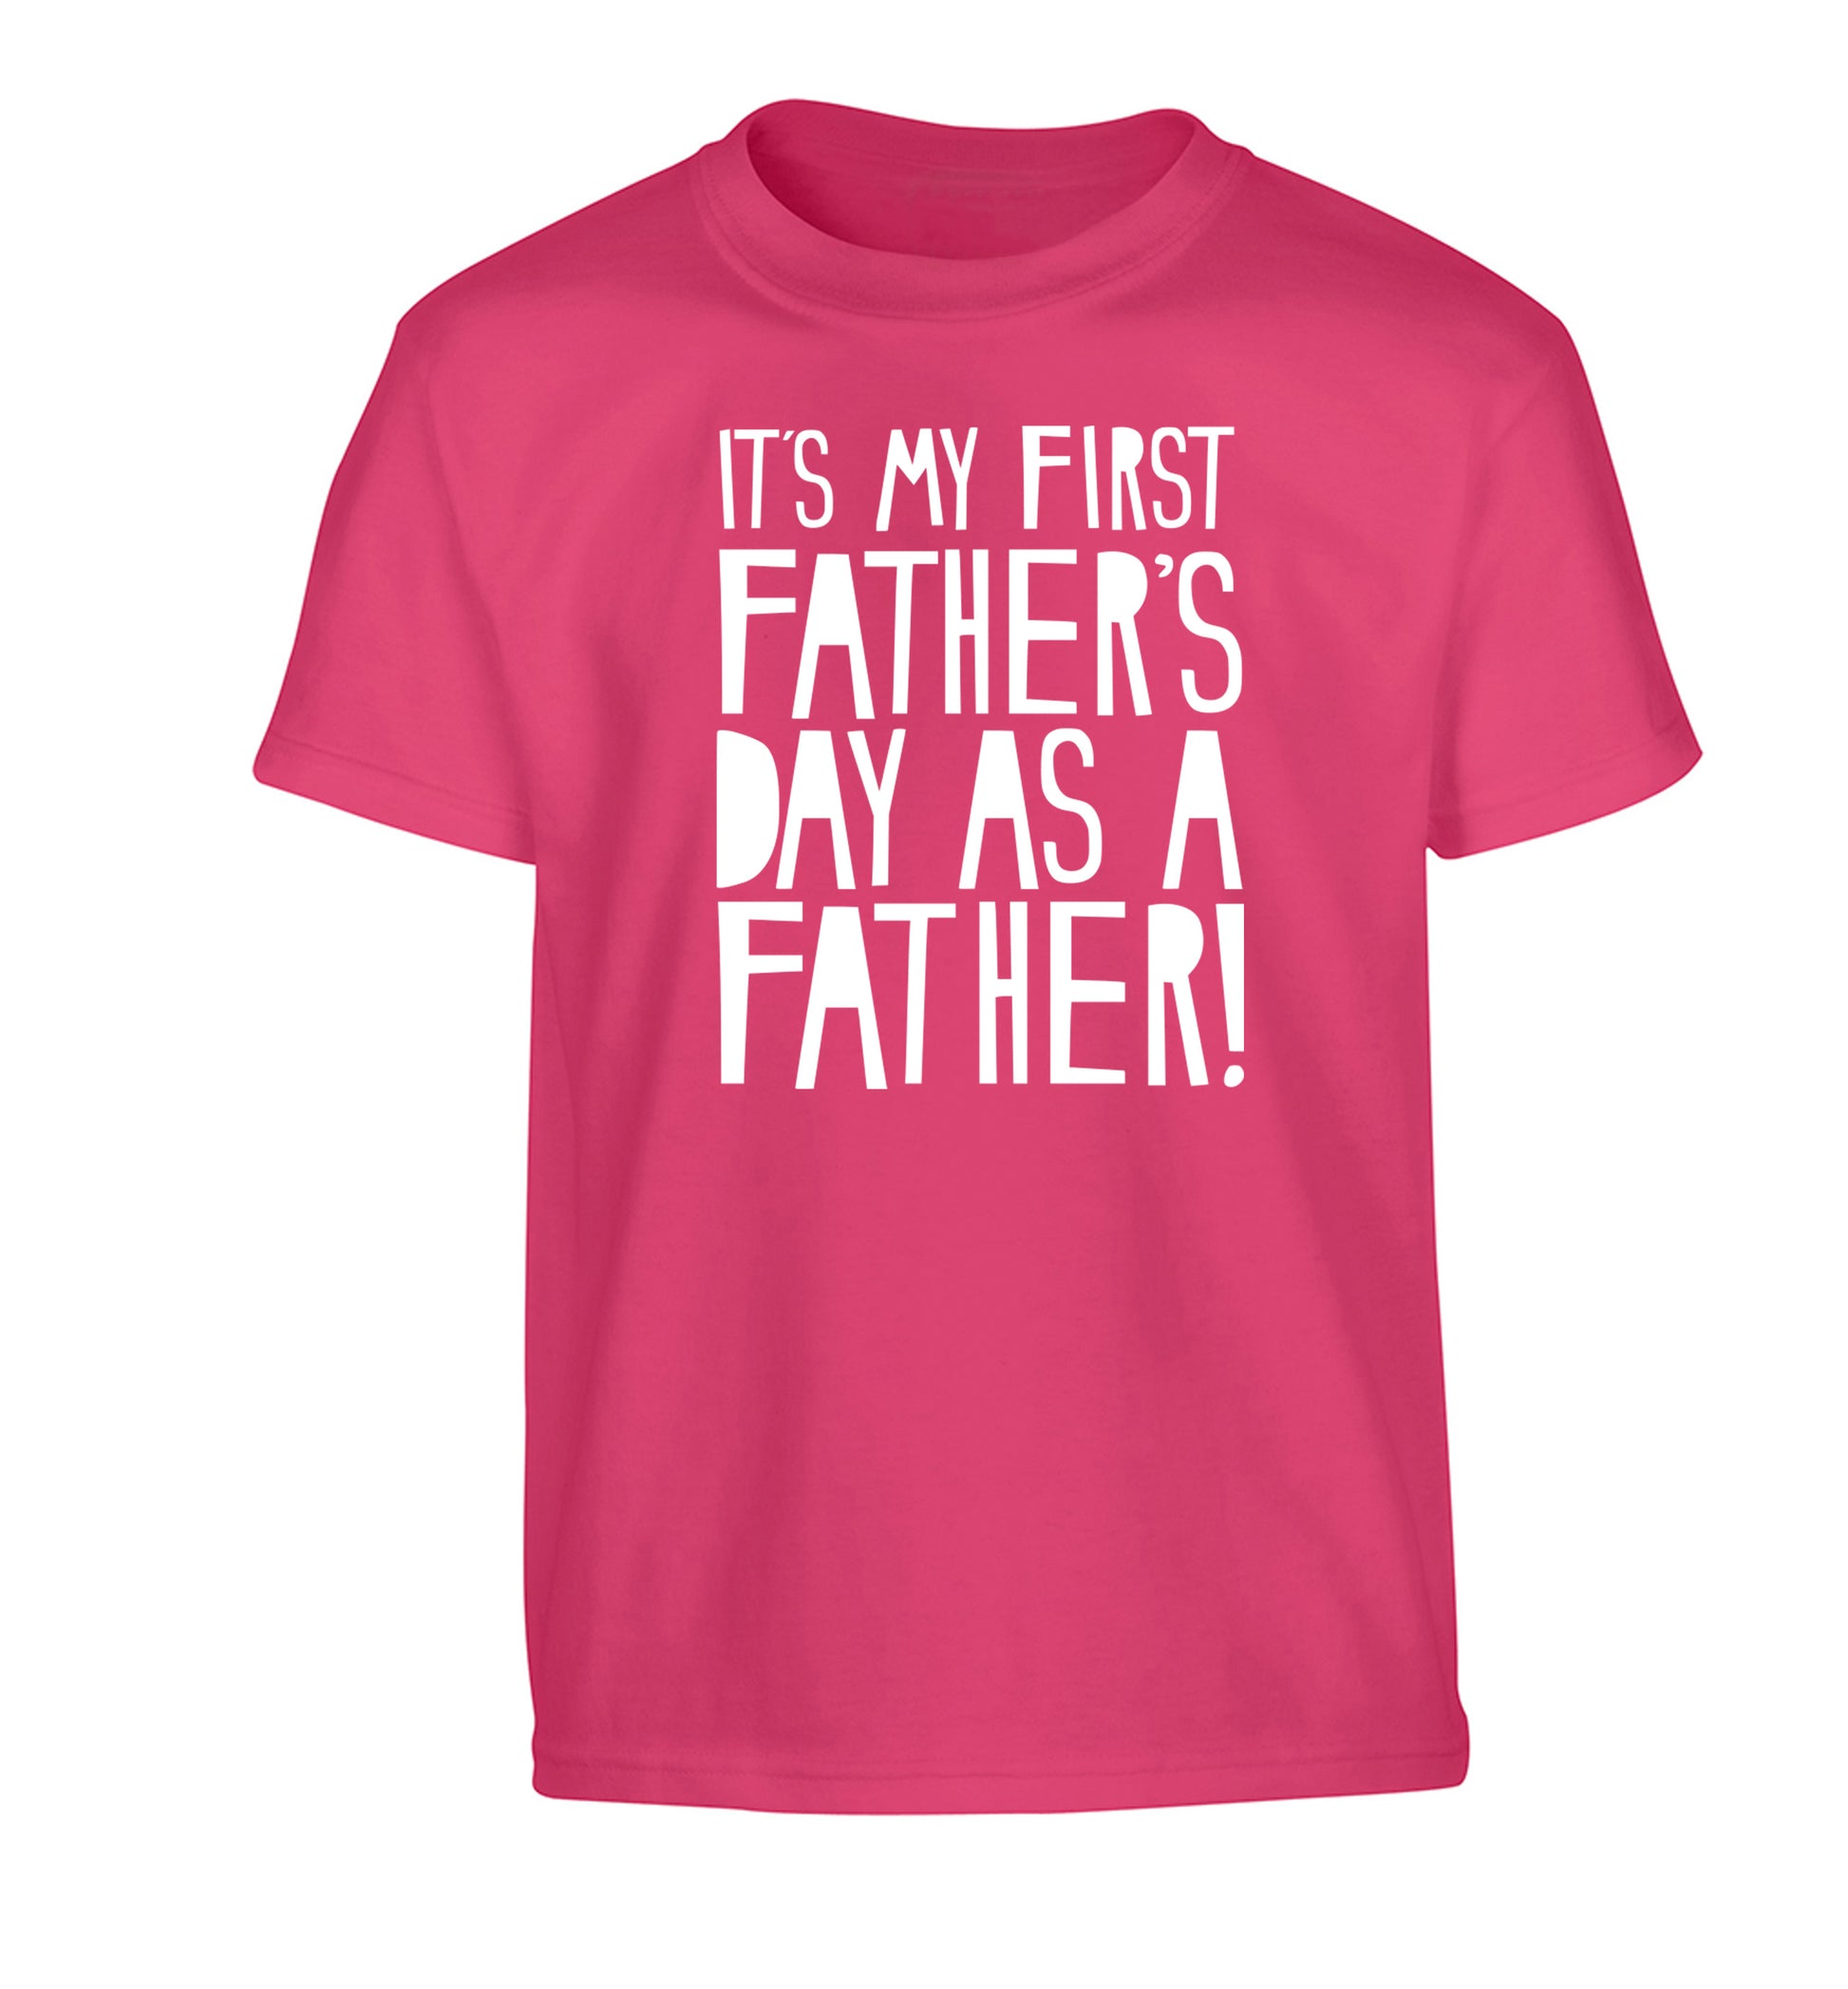 It's my first Father's Day as a father! Children's pink Tshirt 12-13 Years